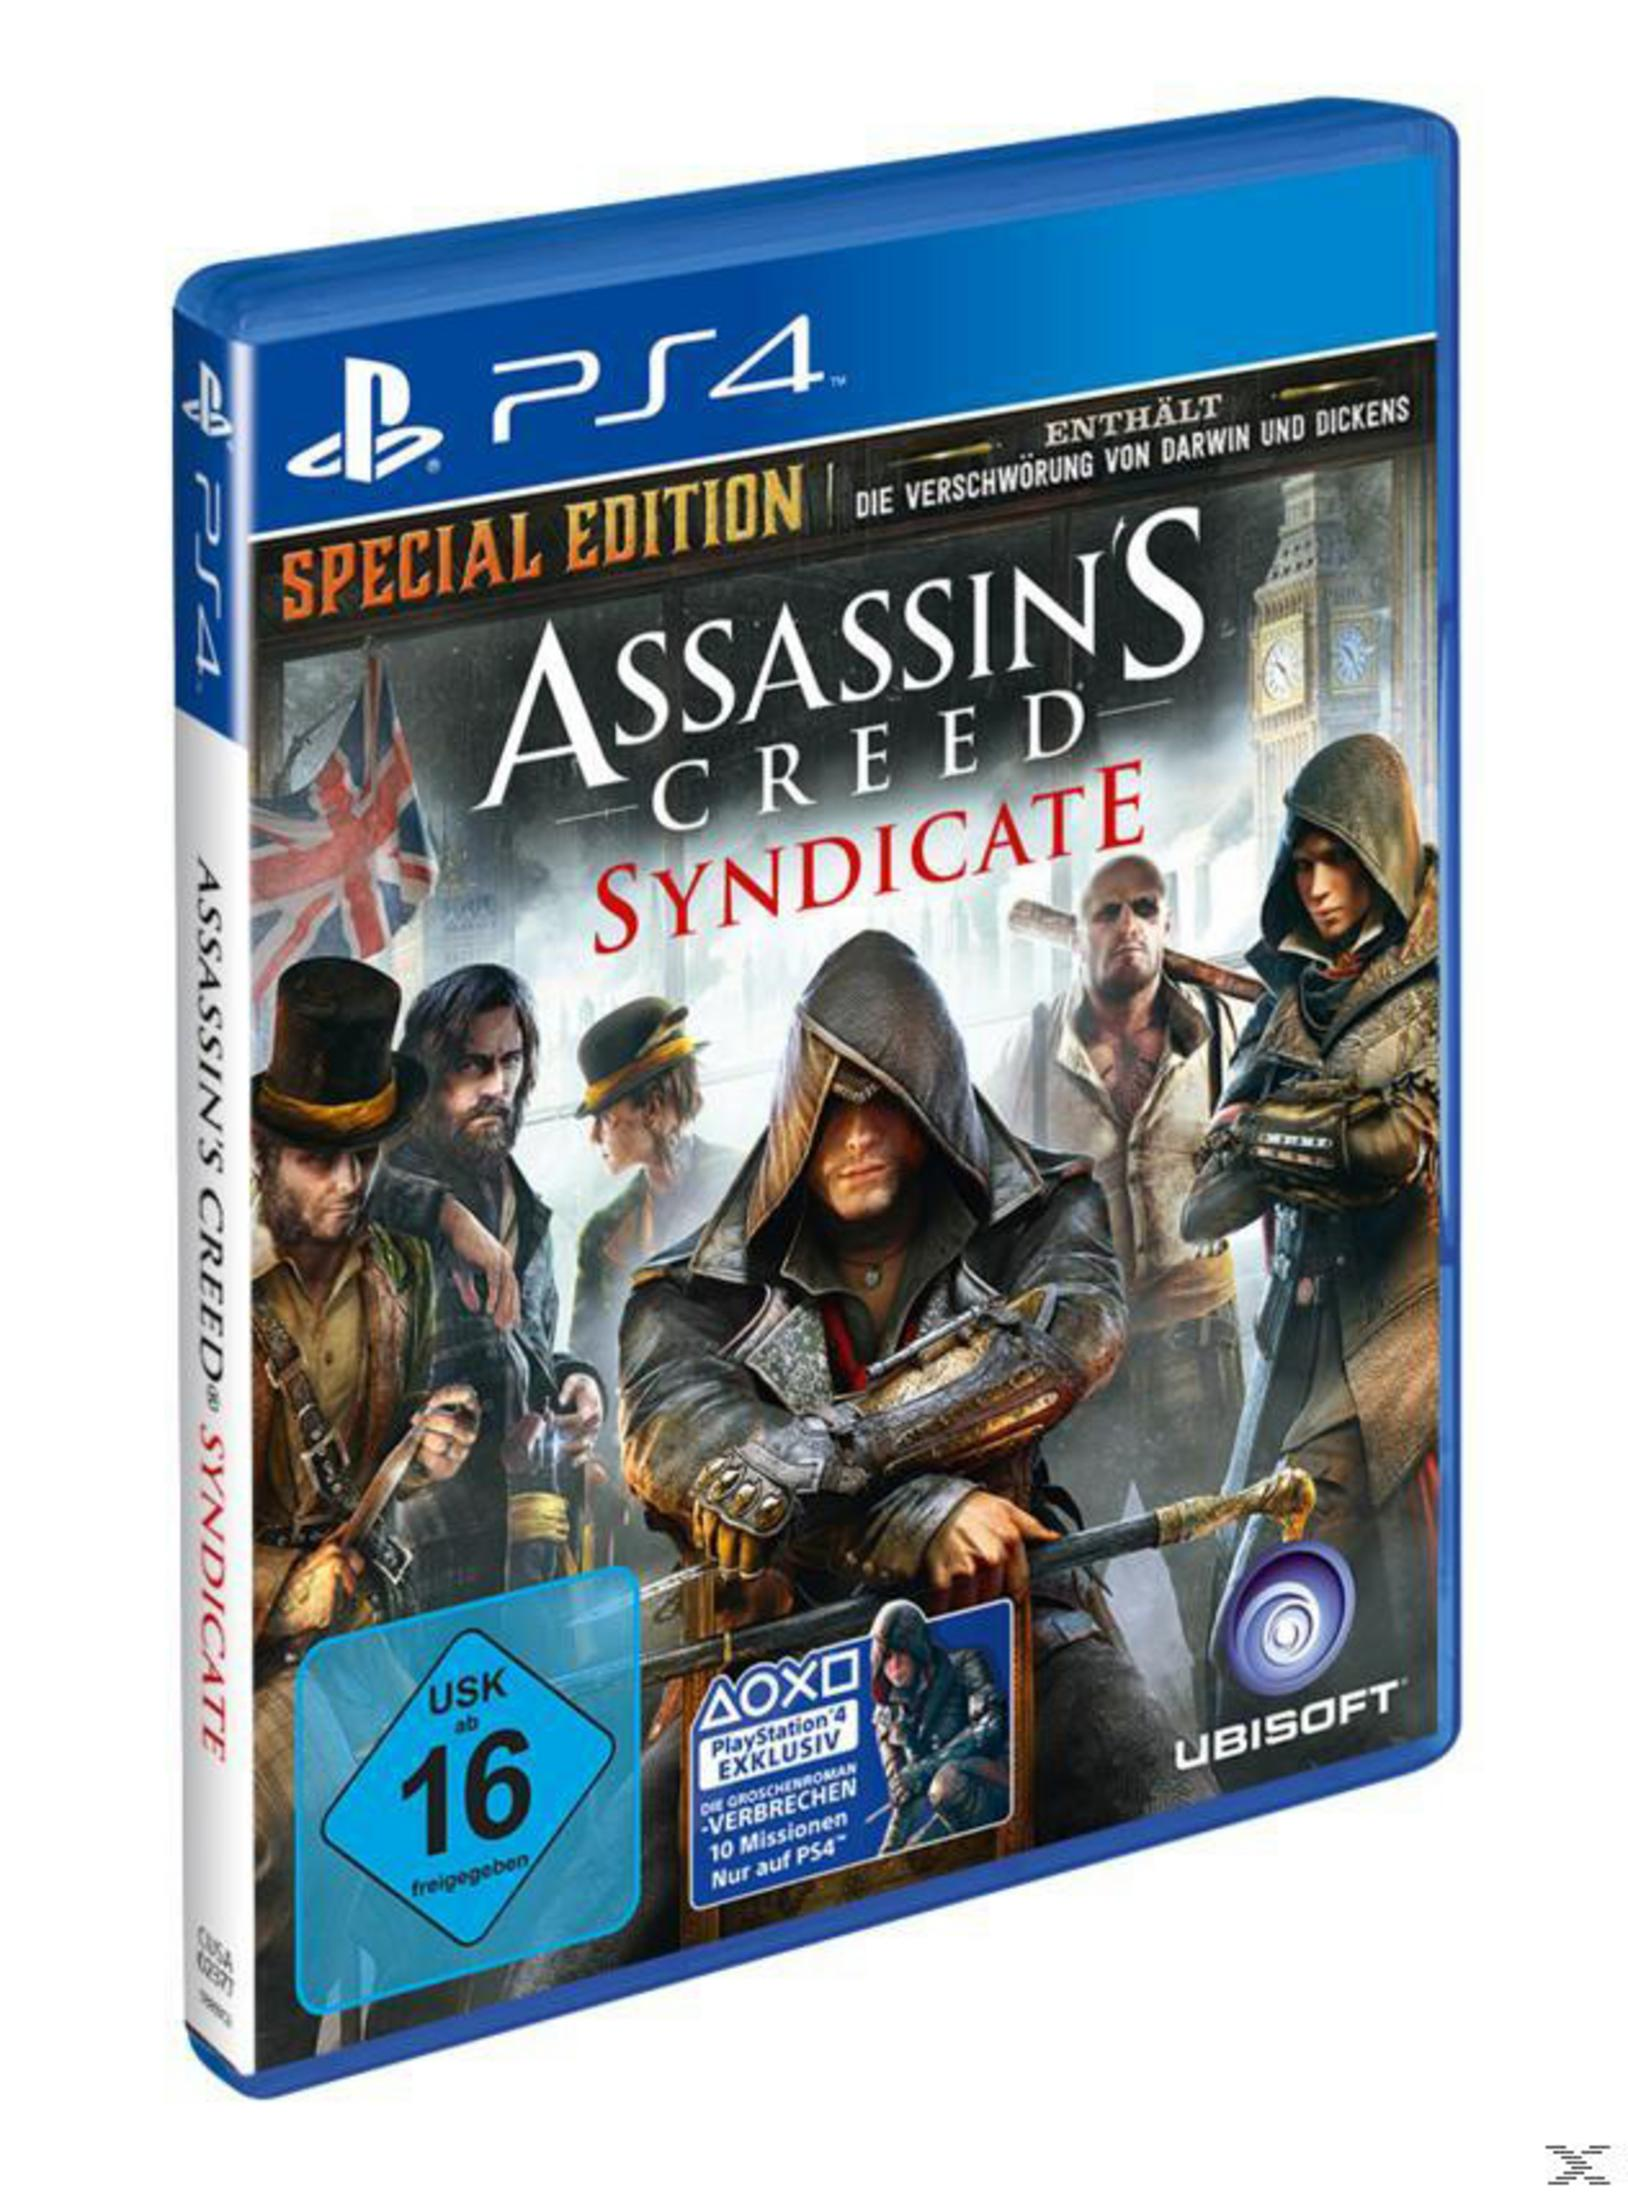 D1 Syndicate Special [PlayStation Creed: - Assassin\'s 4] Edition -